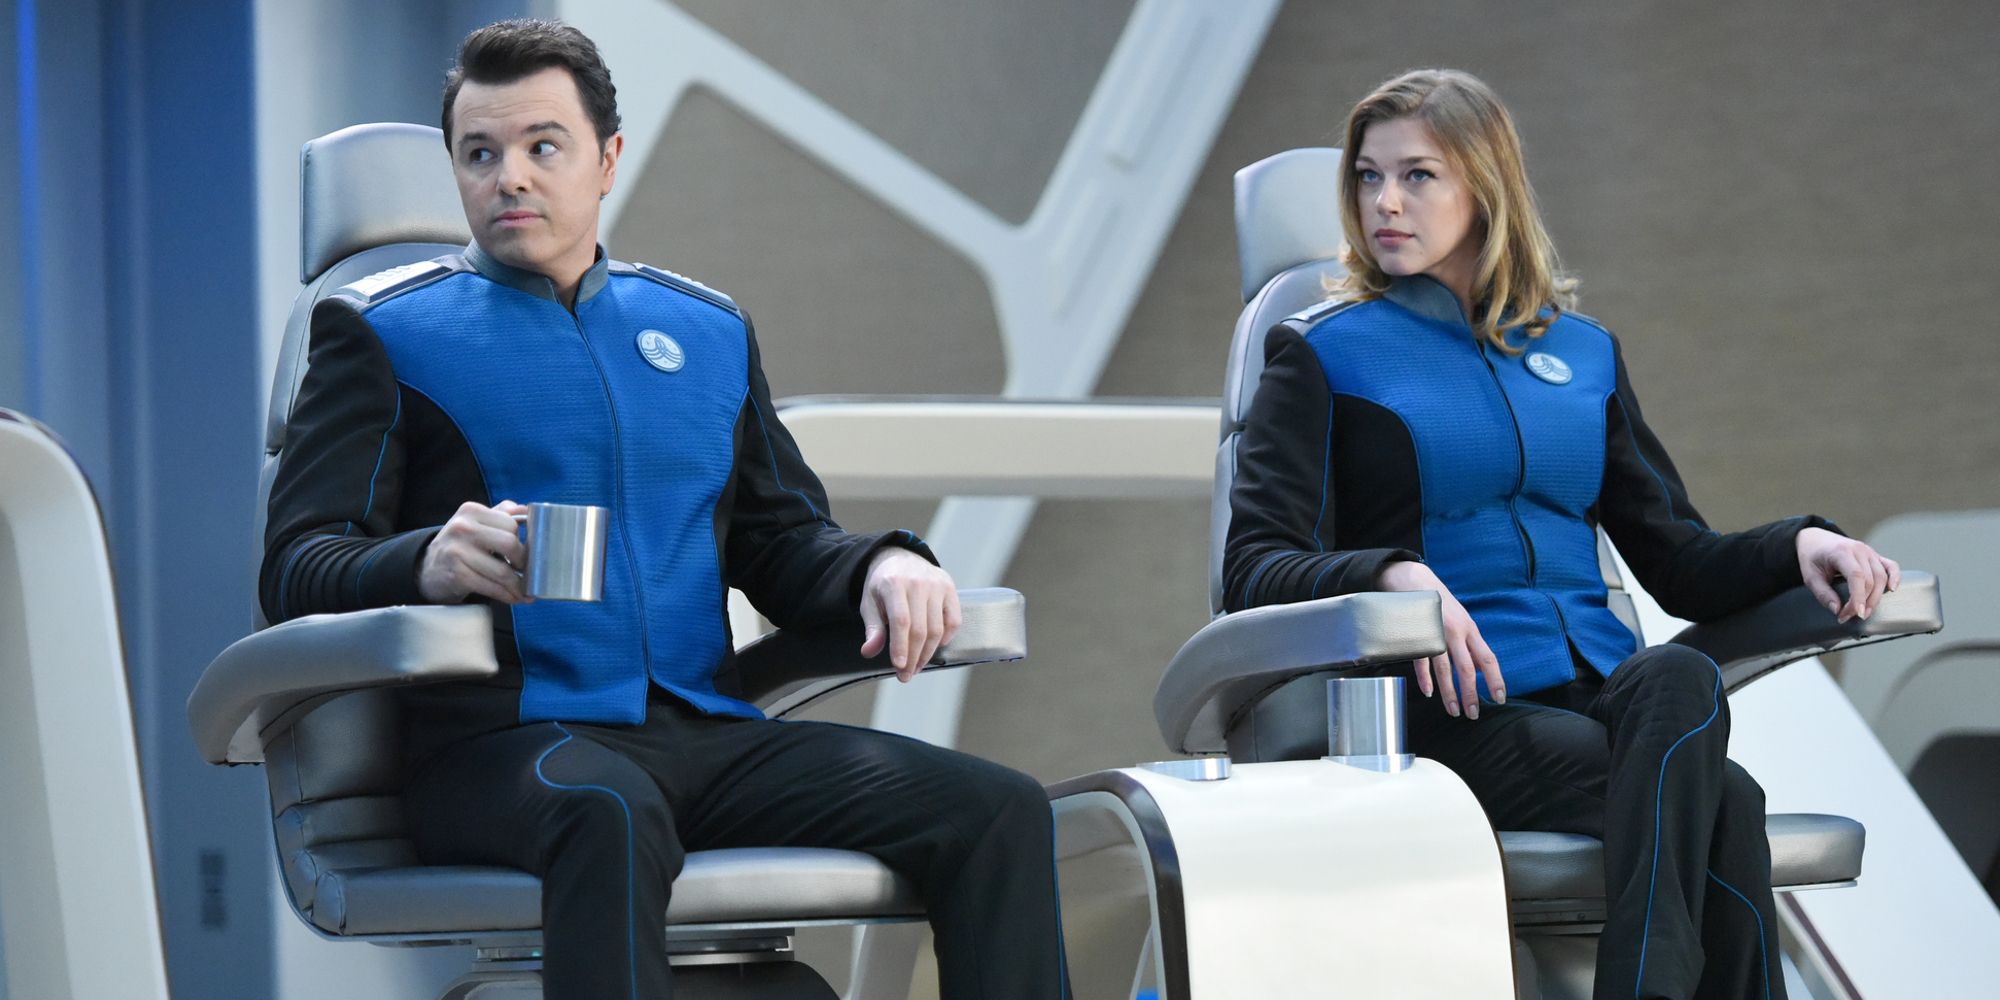 Seth MacFarlane and Adrianne Palicki in The Orville